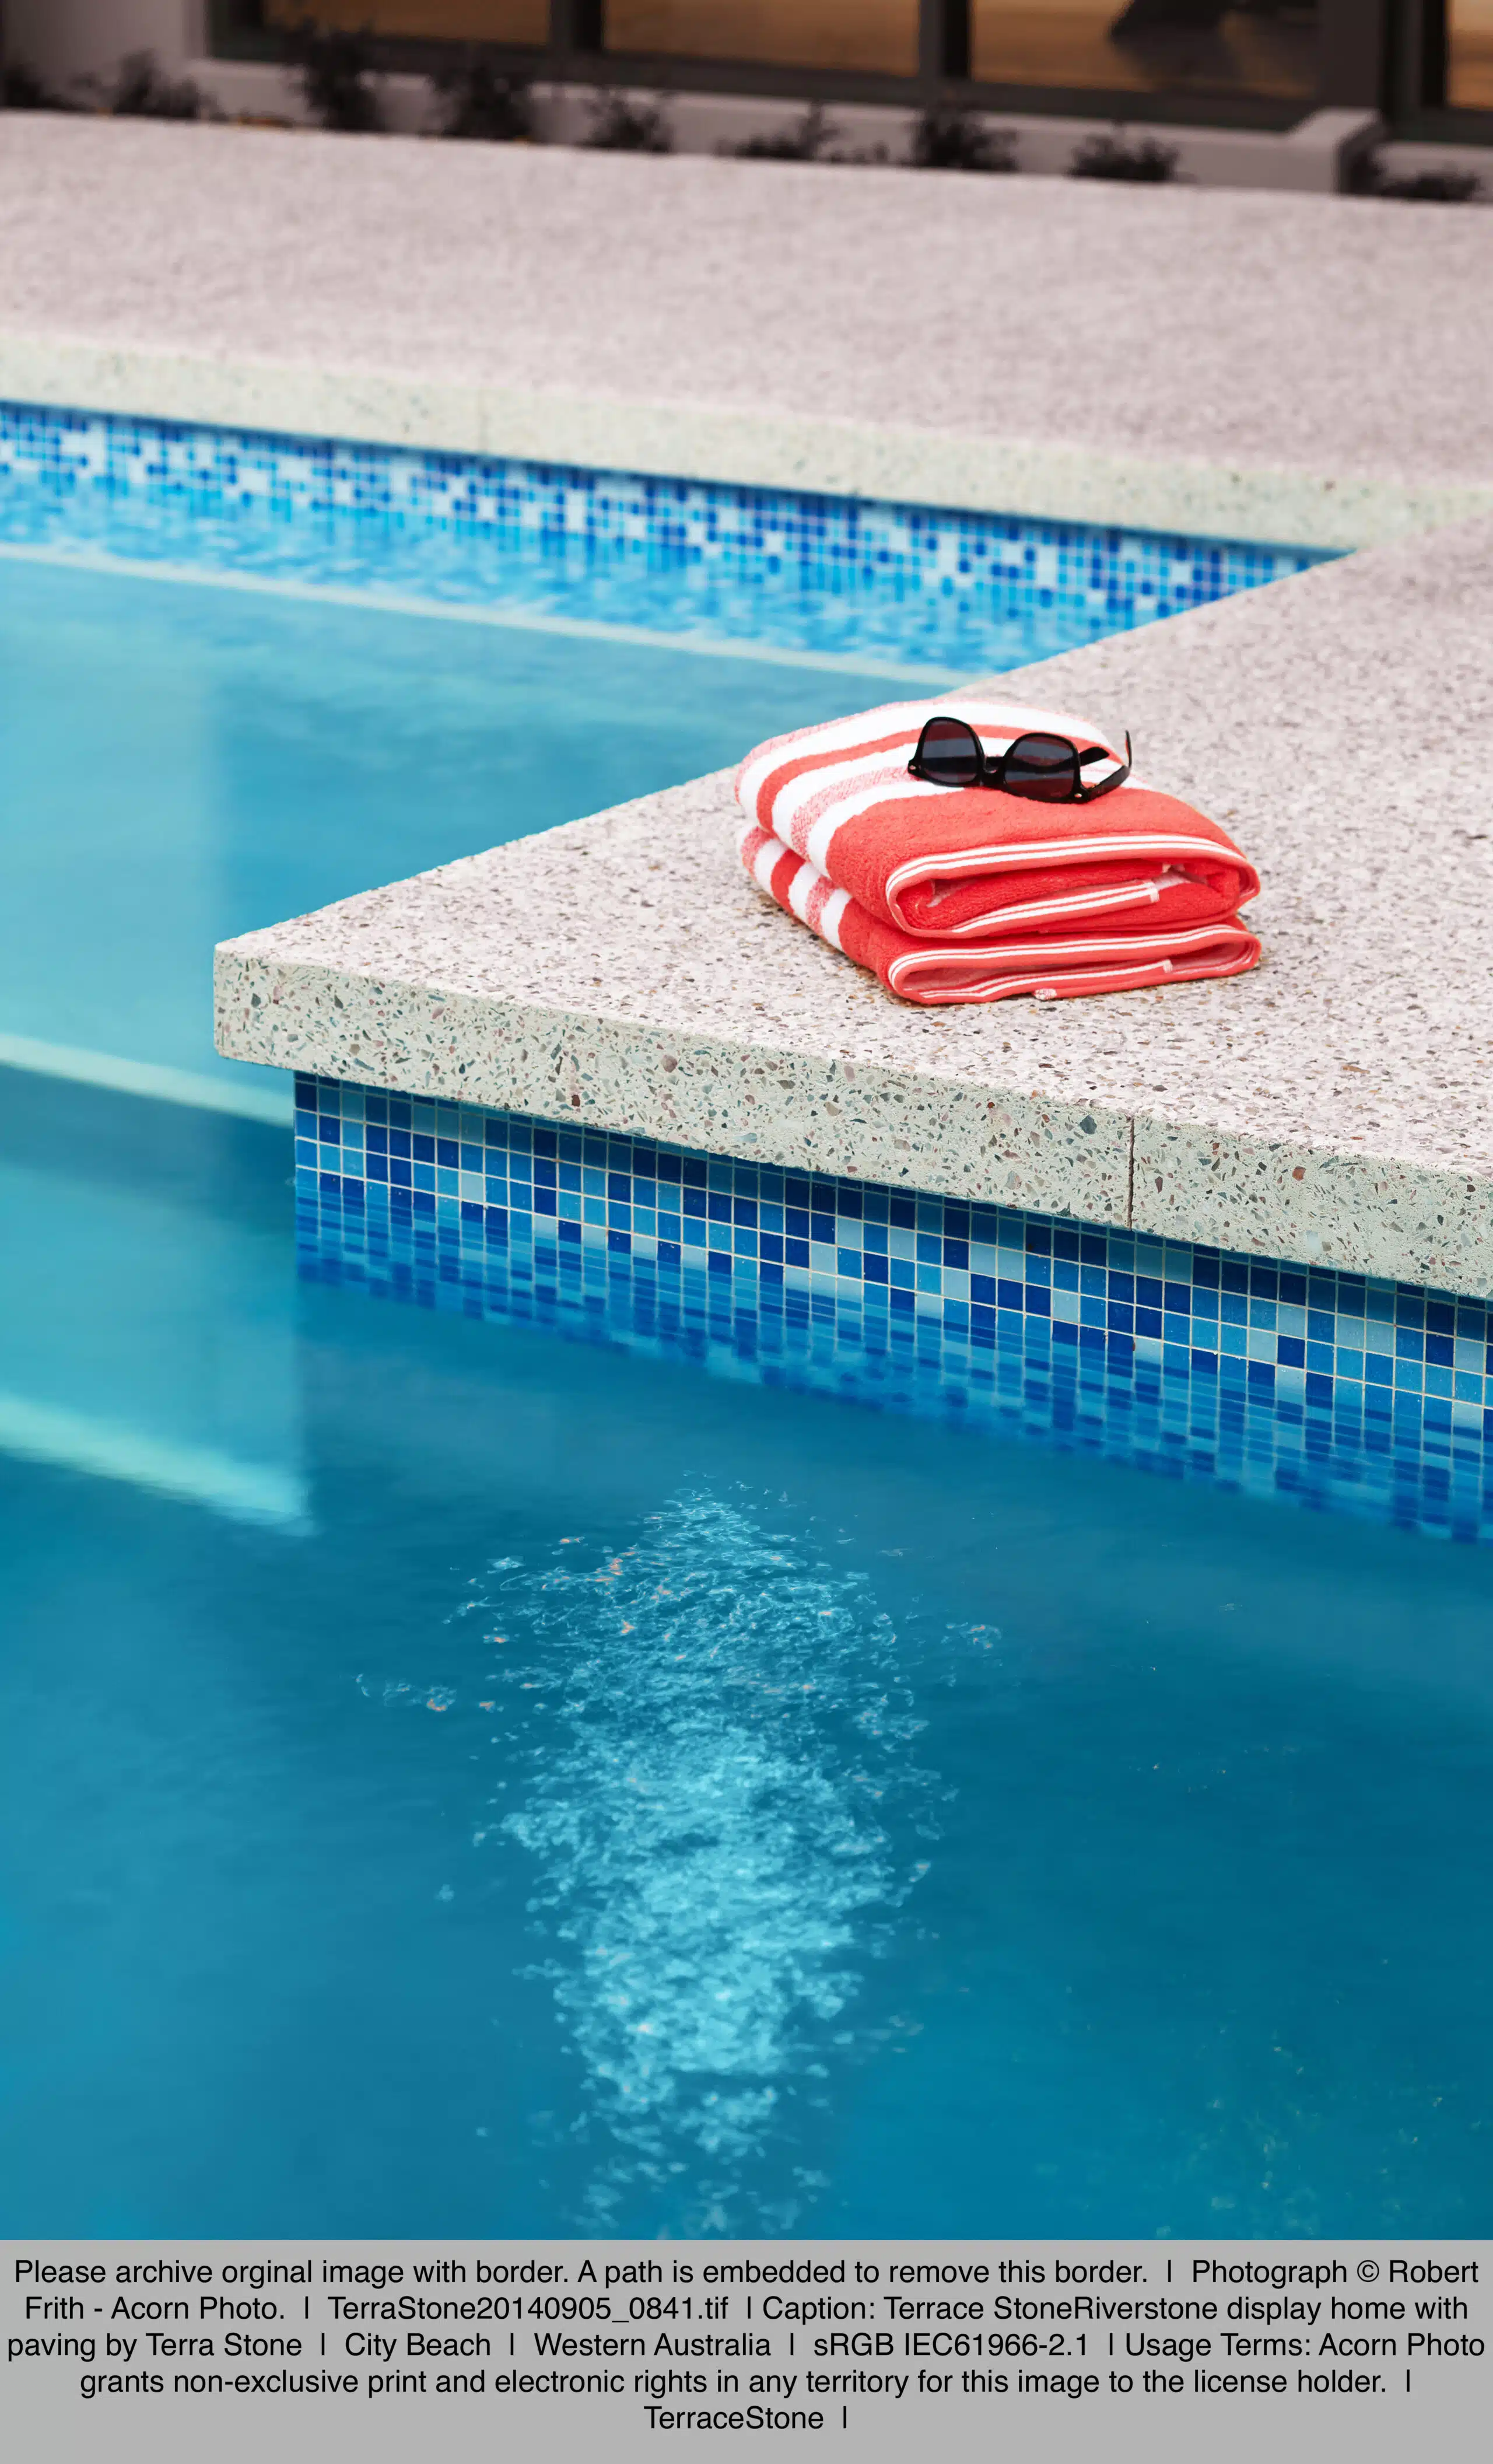 a neatly folded beach towel and sunglasses resting on the edge of a pool